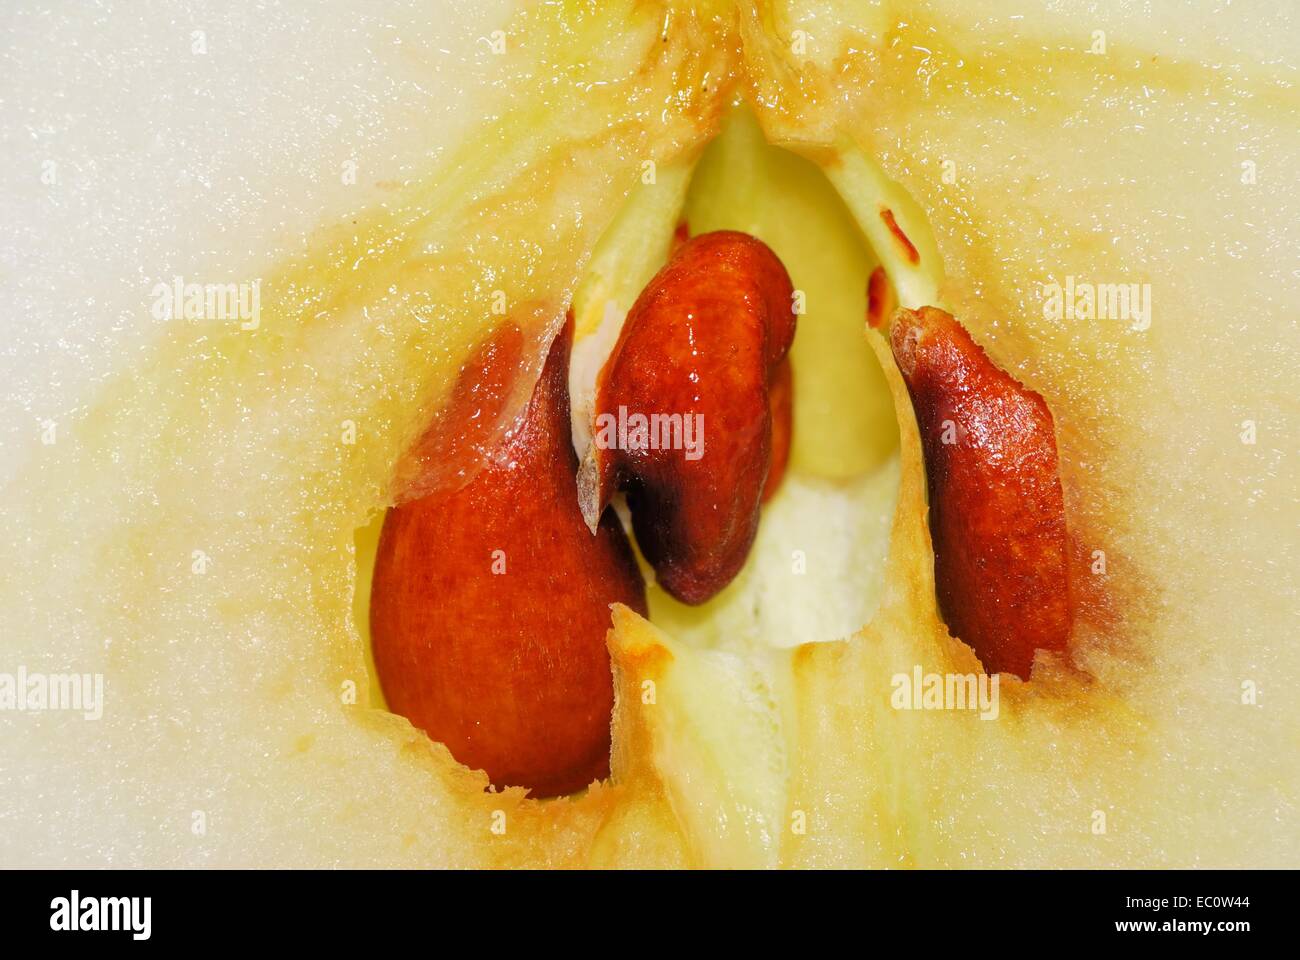 apple core with seeds